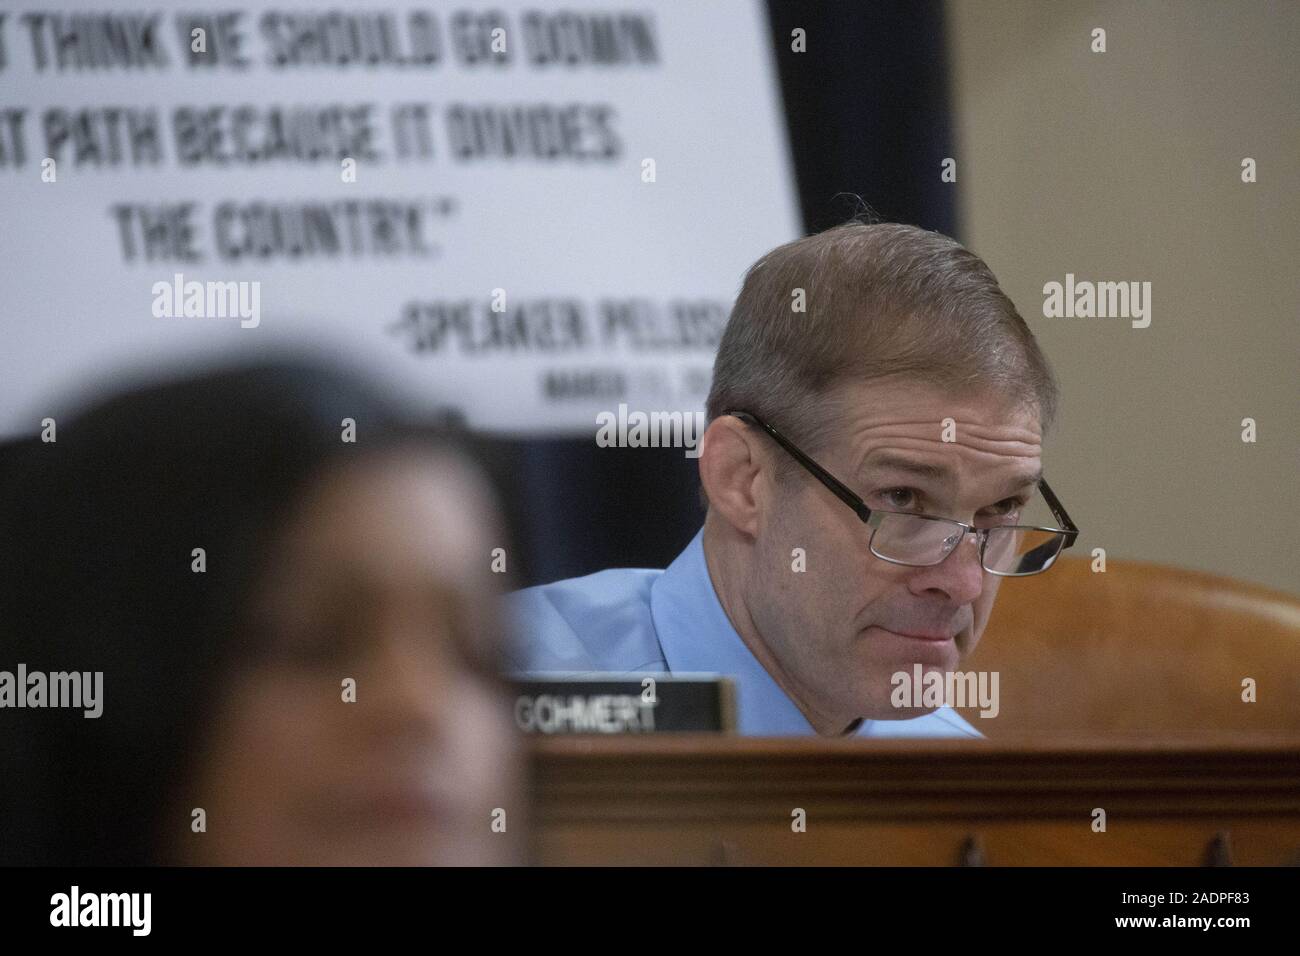 Washington, District of Columbia, USA. 4th Dec, 2019. United States Representative Jim Jordan (Republican of Ohio) speaks during the United States House Committee on the Judiciary hearing with constitutional law experts Noah Feldman, of Harvard University, Pamela Karlan, of Stanford University, Michael Gerhardt, of the University of North Carolina, and Jonathan Turley of The George Washington University Law School on Capitol Hill in Washington, DC, U.S. on Wednesday, December 4, 2019. Credit: Stefani Reynolds/CNP/ZUMA Wire/Alamy Live News Stock Photo